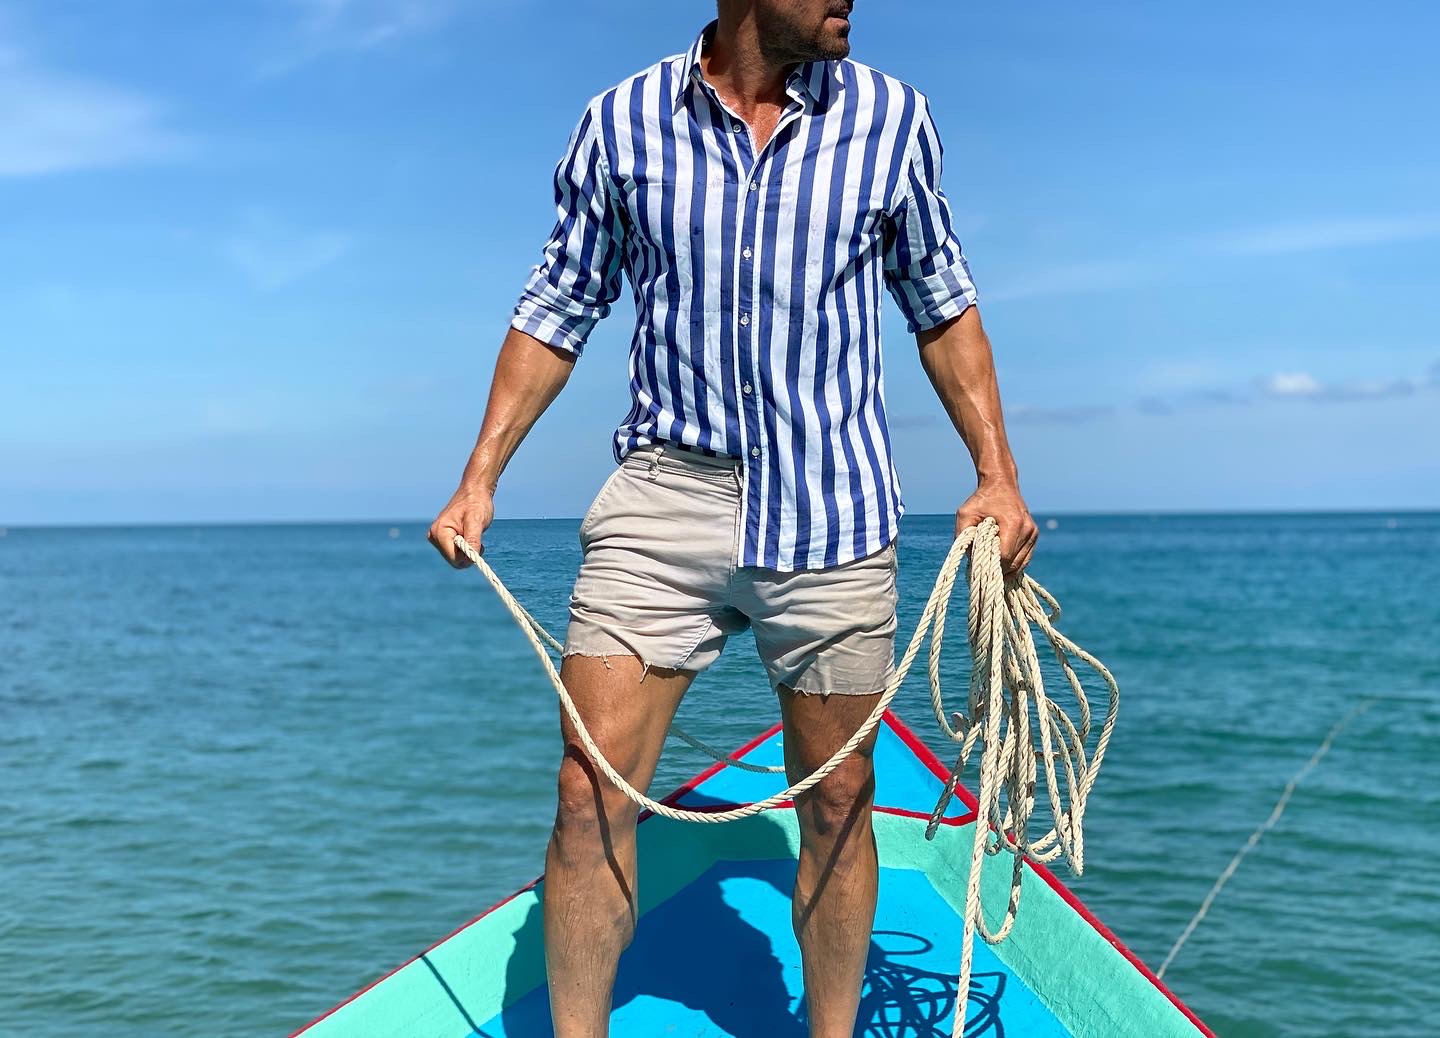 A model in a striped dress shirt by Teddy Stratford and shorts in a boating setting.